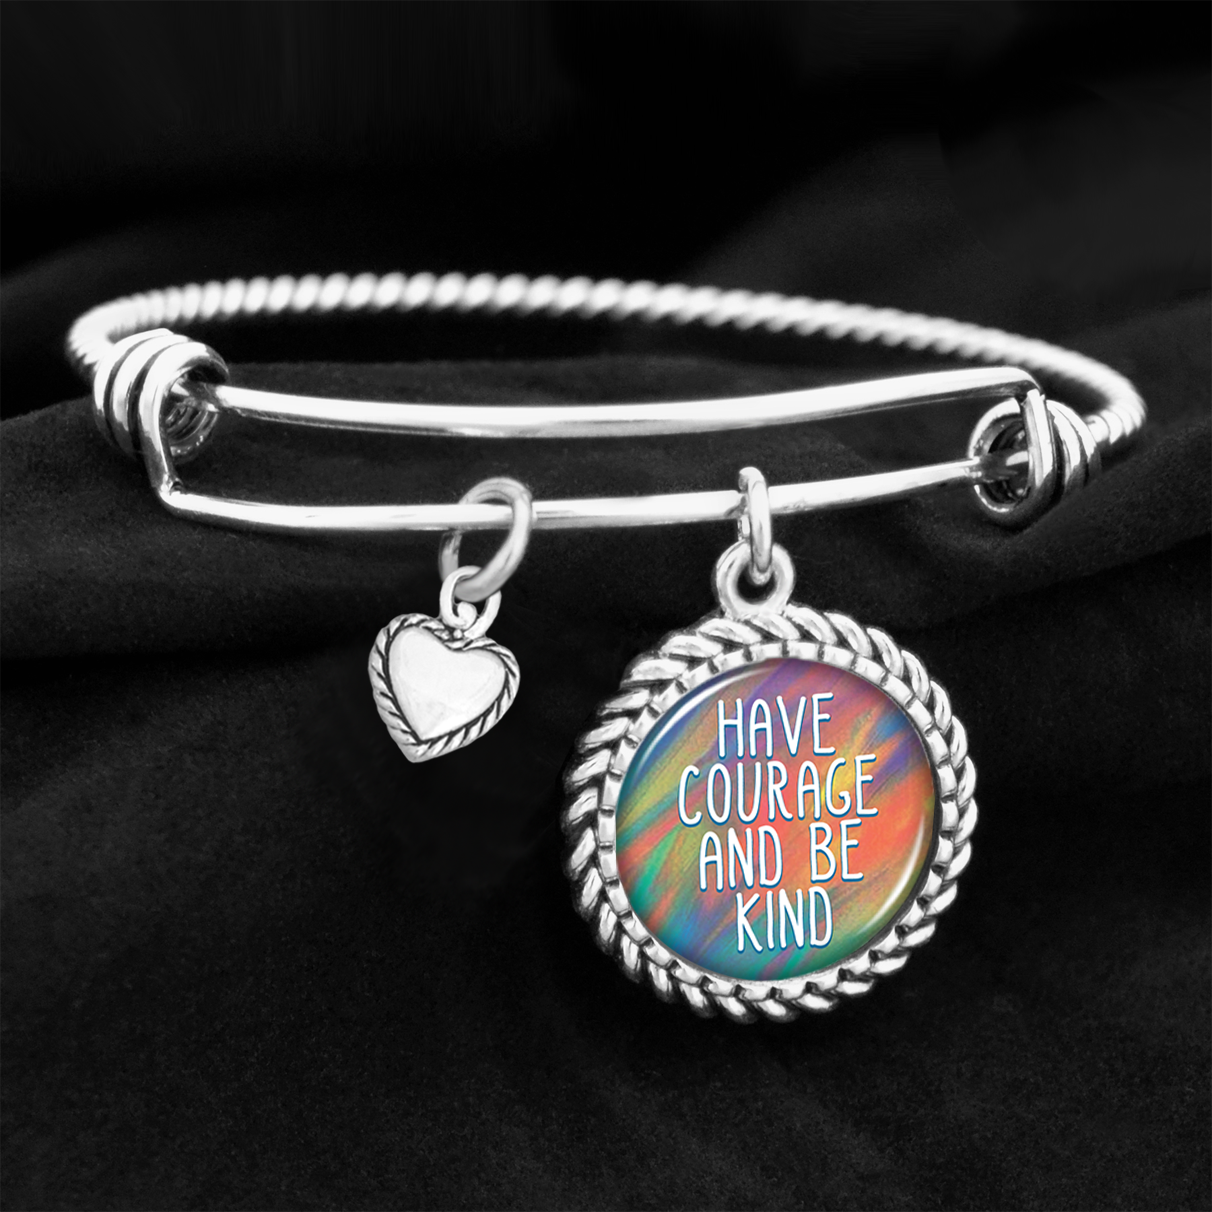 Have Courage And Be Kind Charm Bracelet